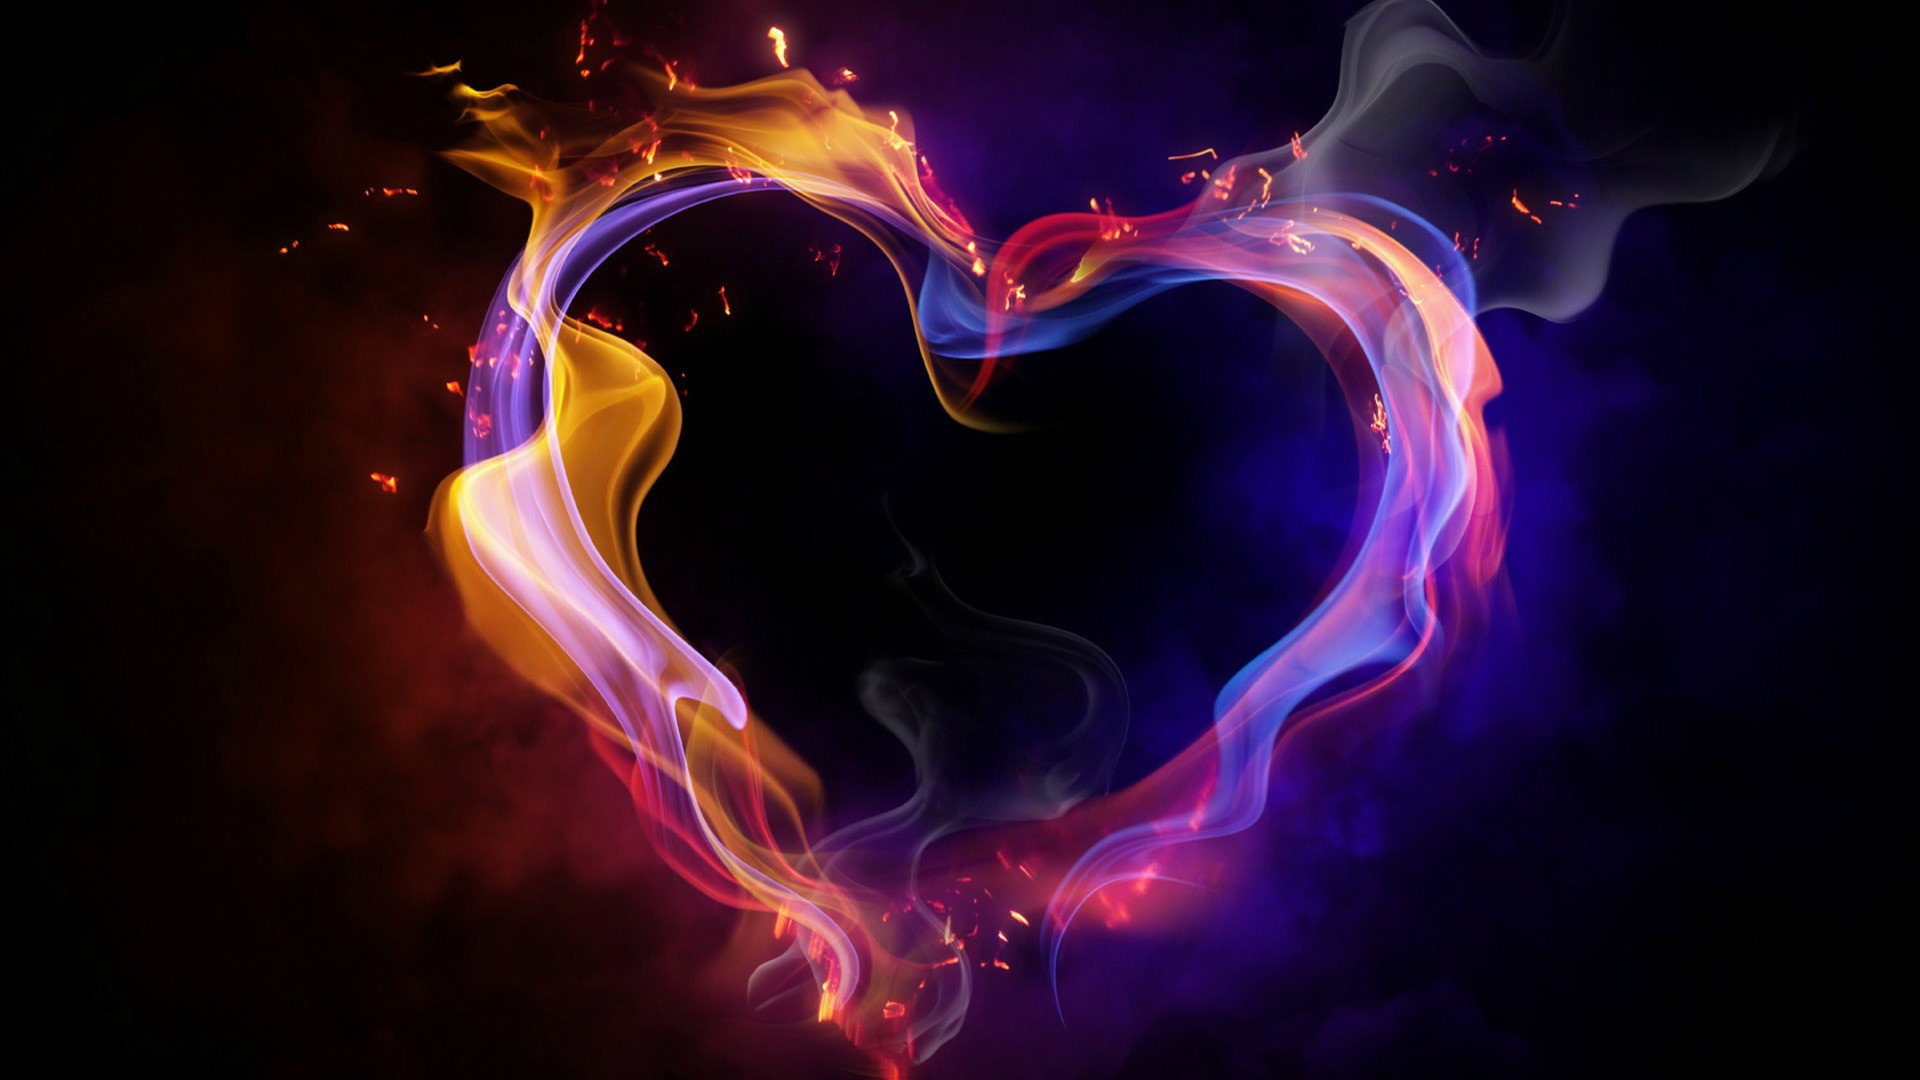 Hd 1920x1080 Cool Color Abstract Heart Desktop Wallpapers Backgrounds 1920x1080